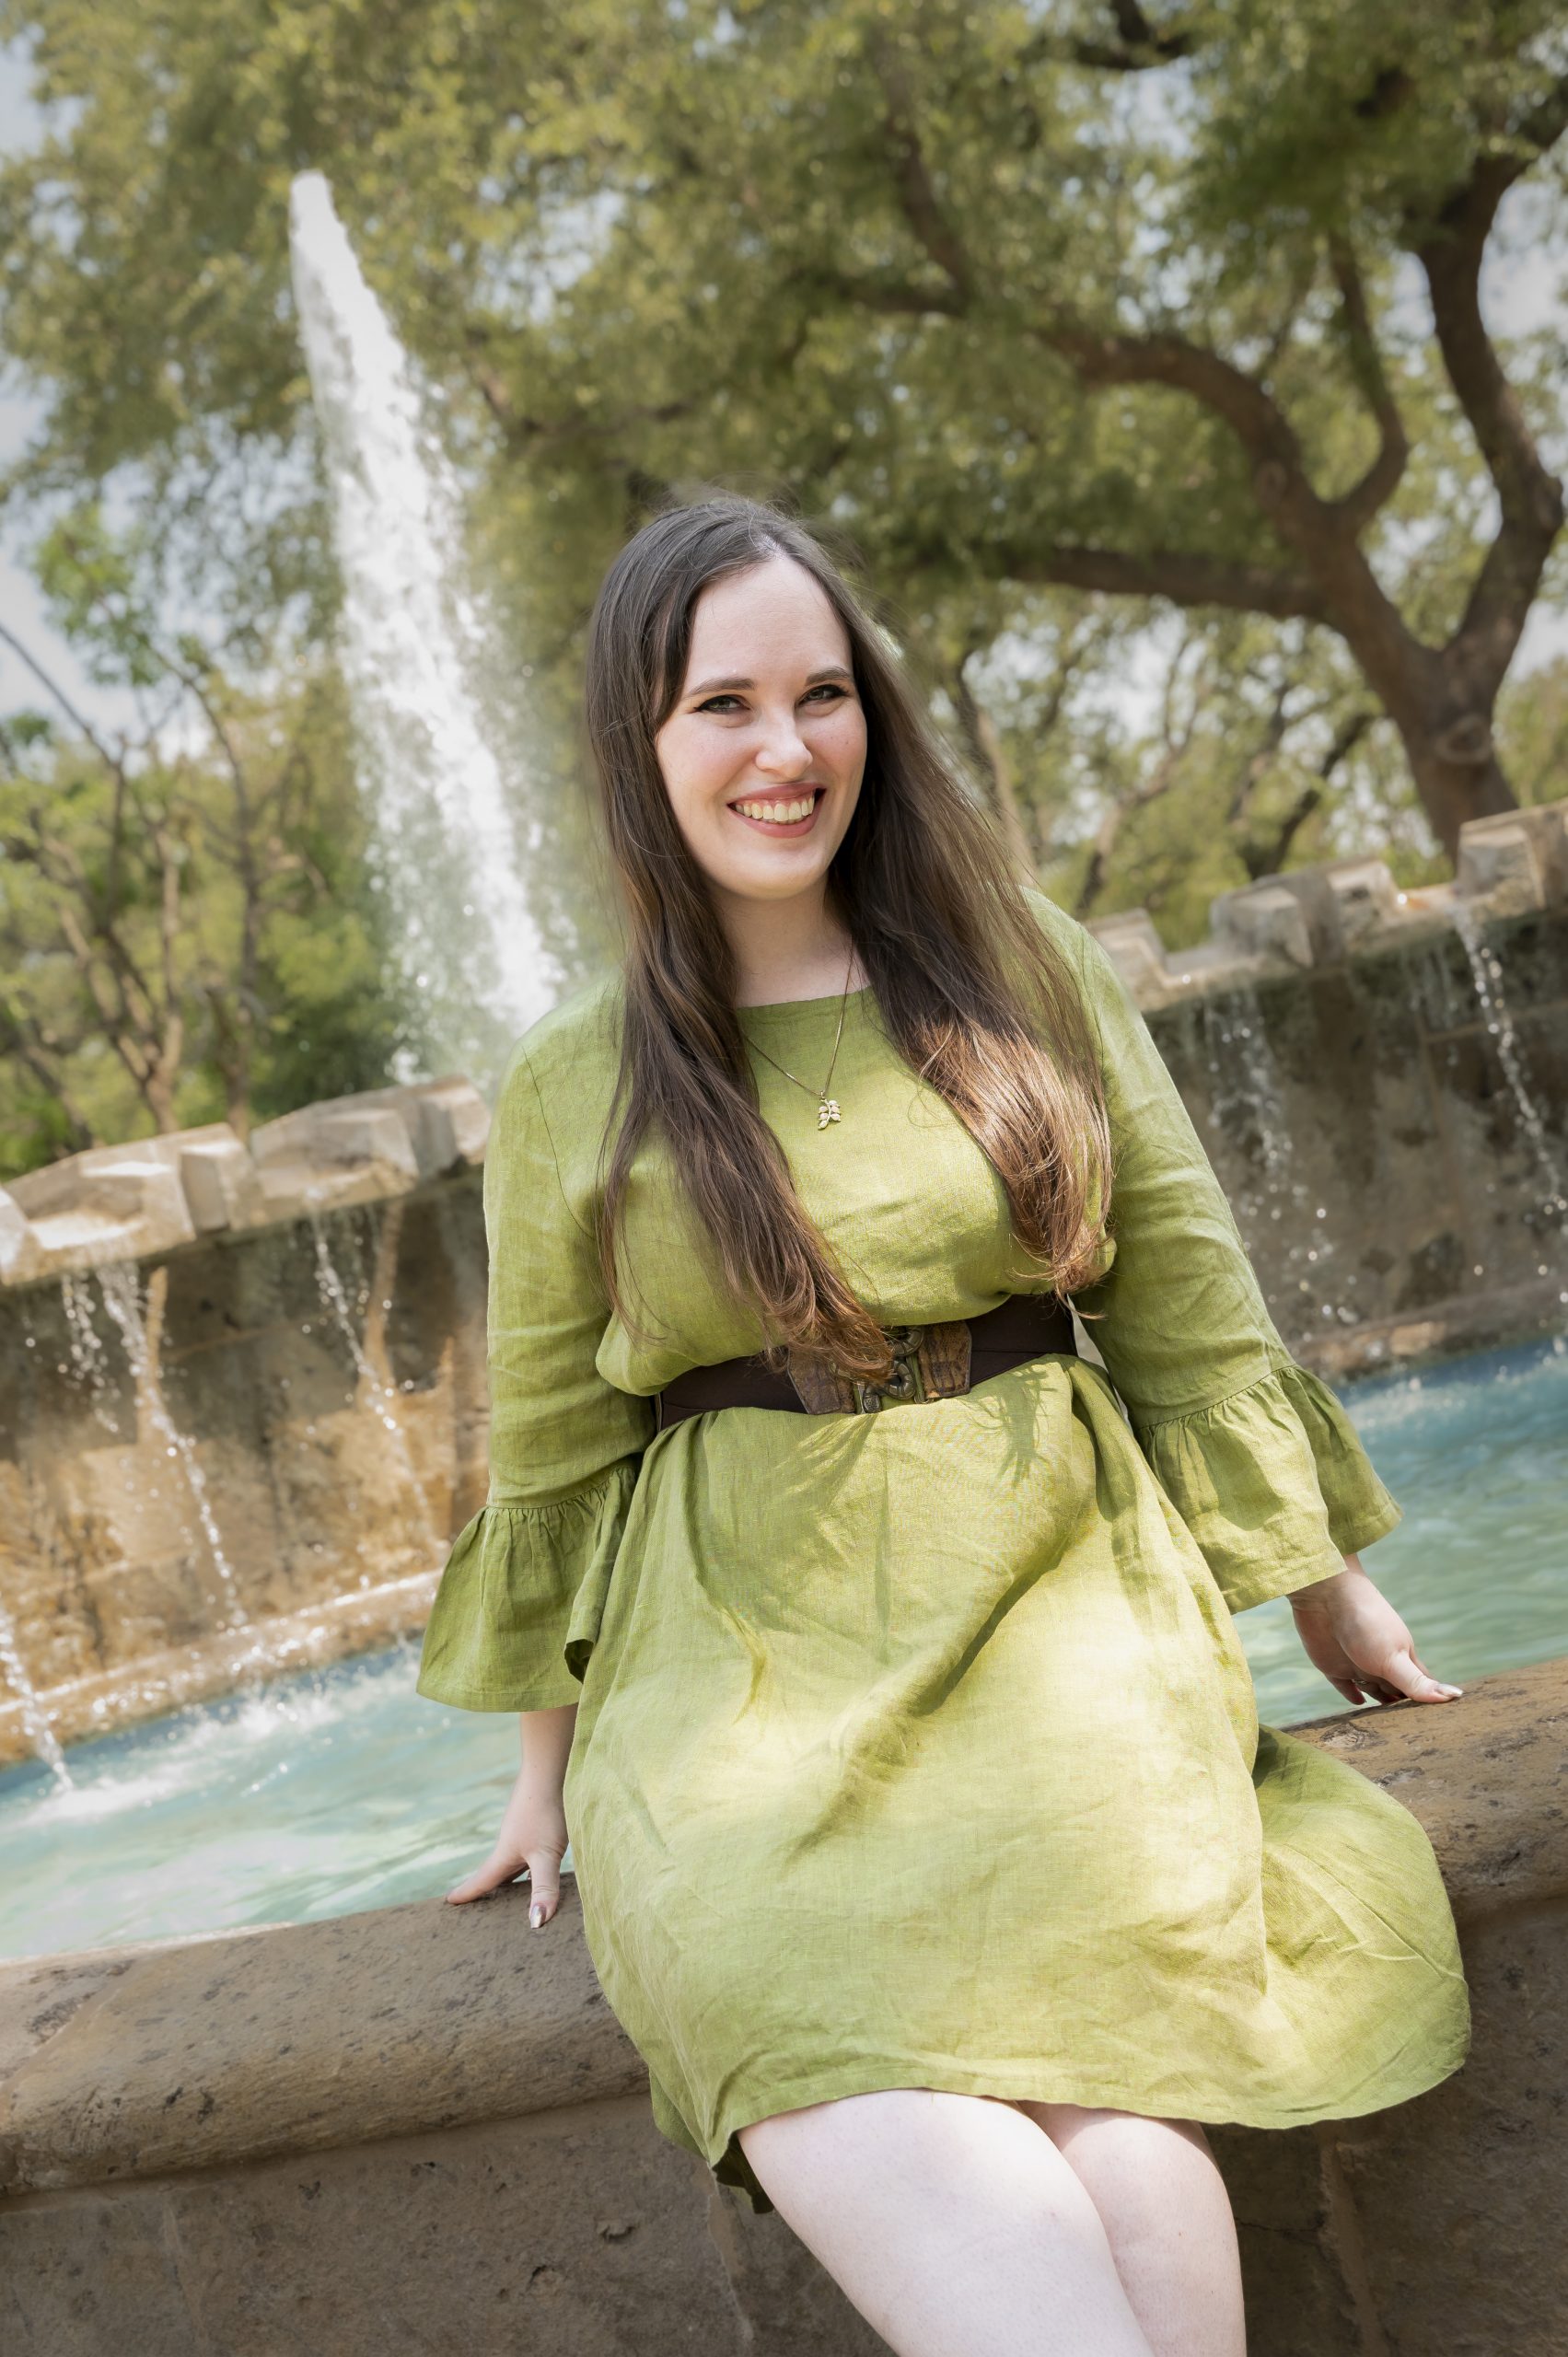 Kathryn smiles at camera while leaning against a fountain. She is wearing a green dress with a brown belt.